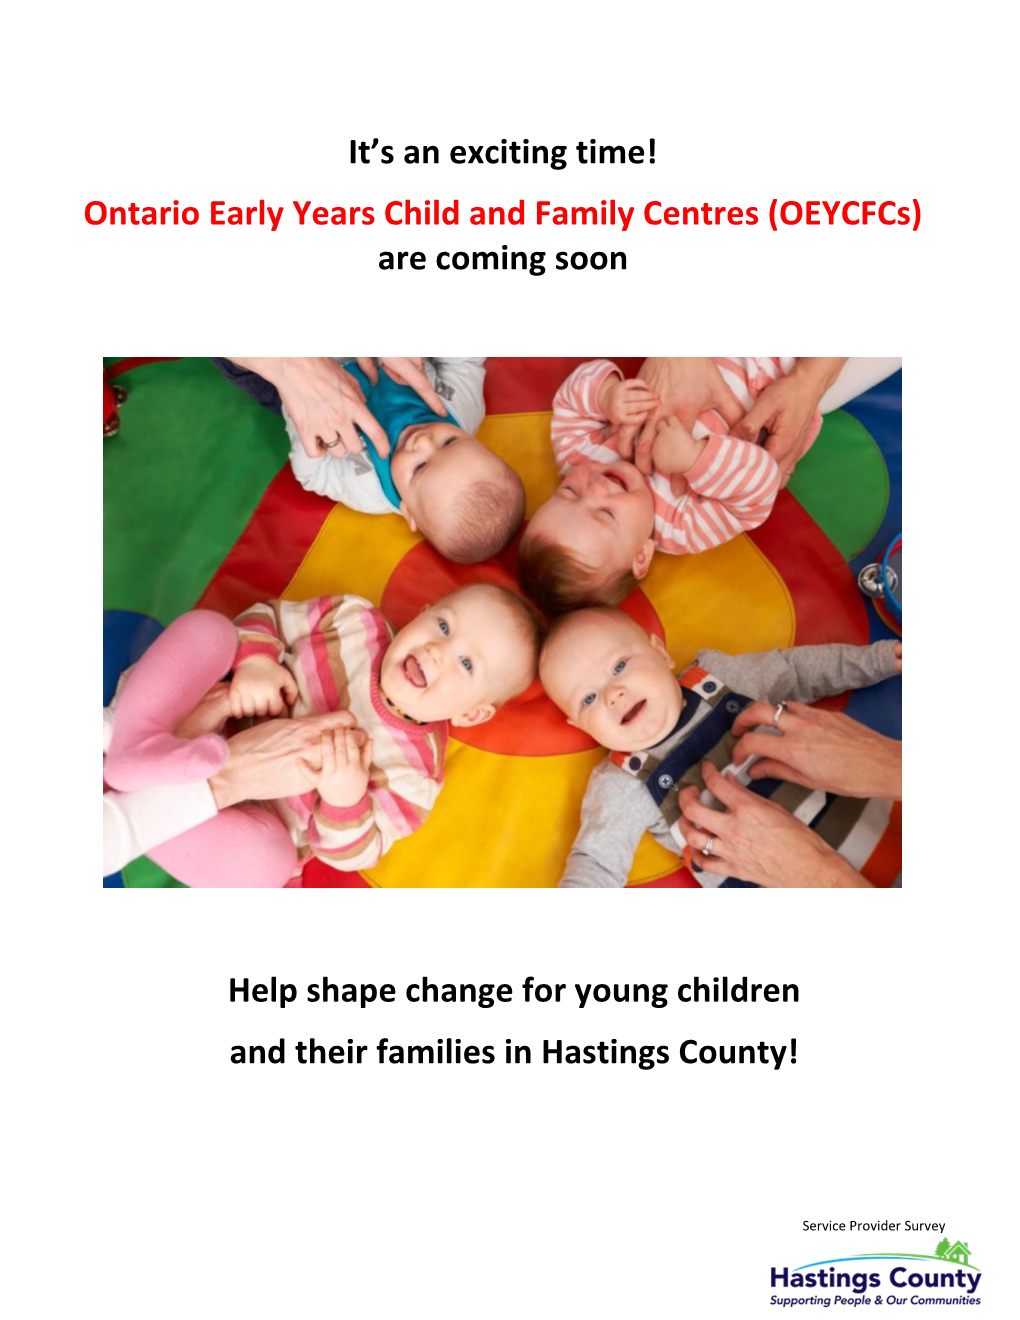 Ontario Early Years Child and Family Centres (Oeycfcs) Are Coming Soon